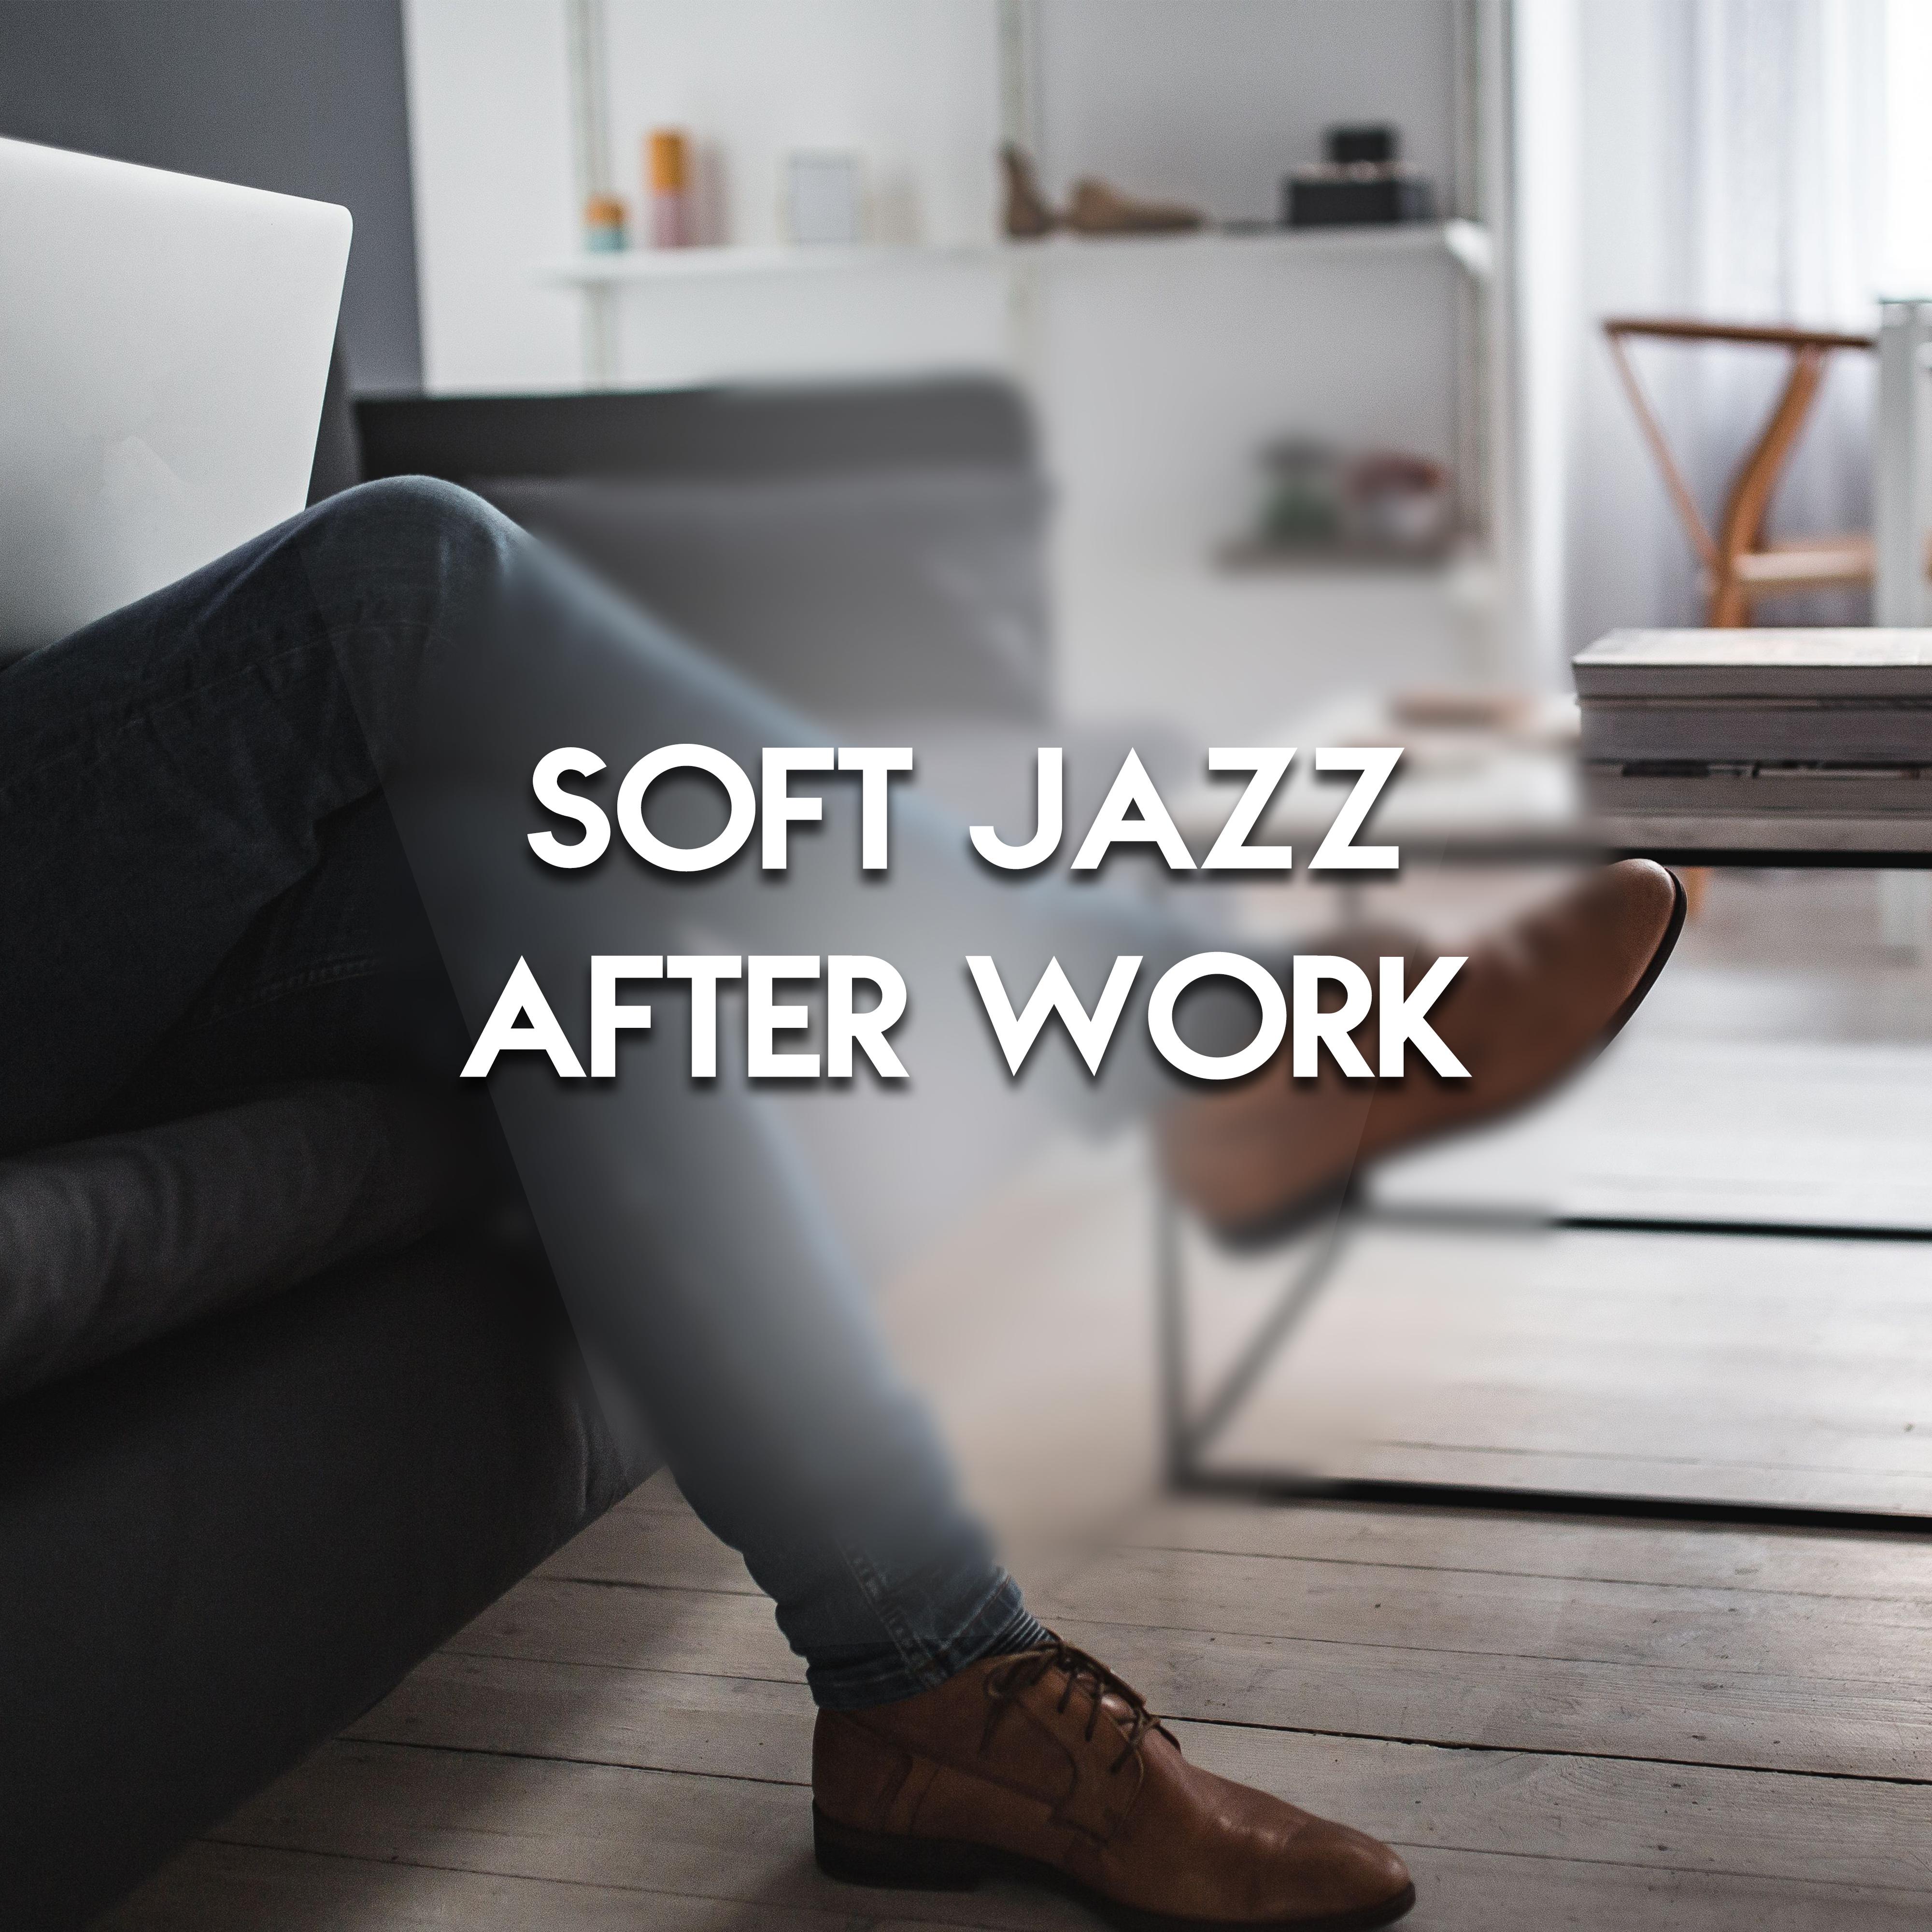 Soft Jazz After Work  Stress Relief, Soothing Music to Calm Down, Inner Harmony, Peaceful Mind, Pure Relaxation